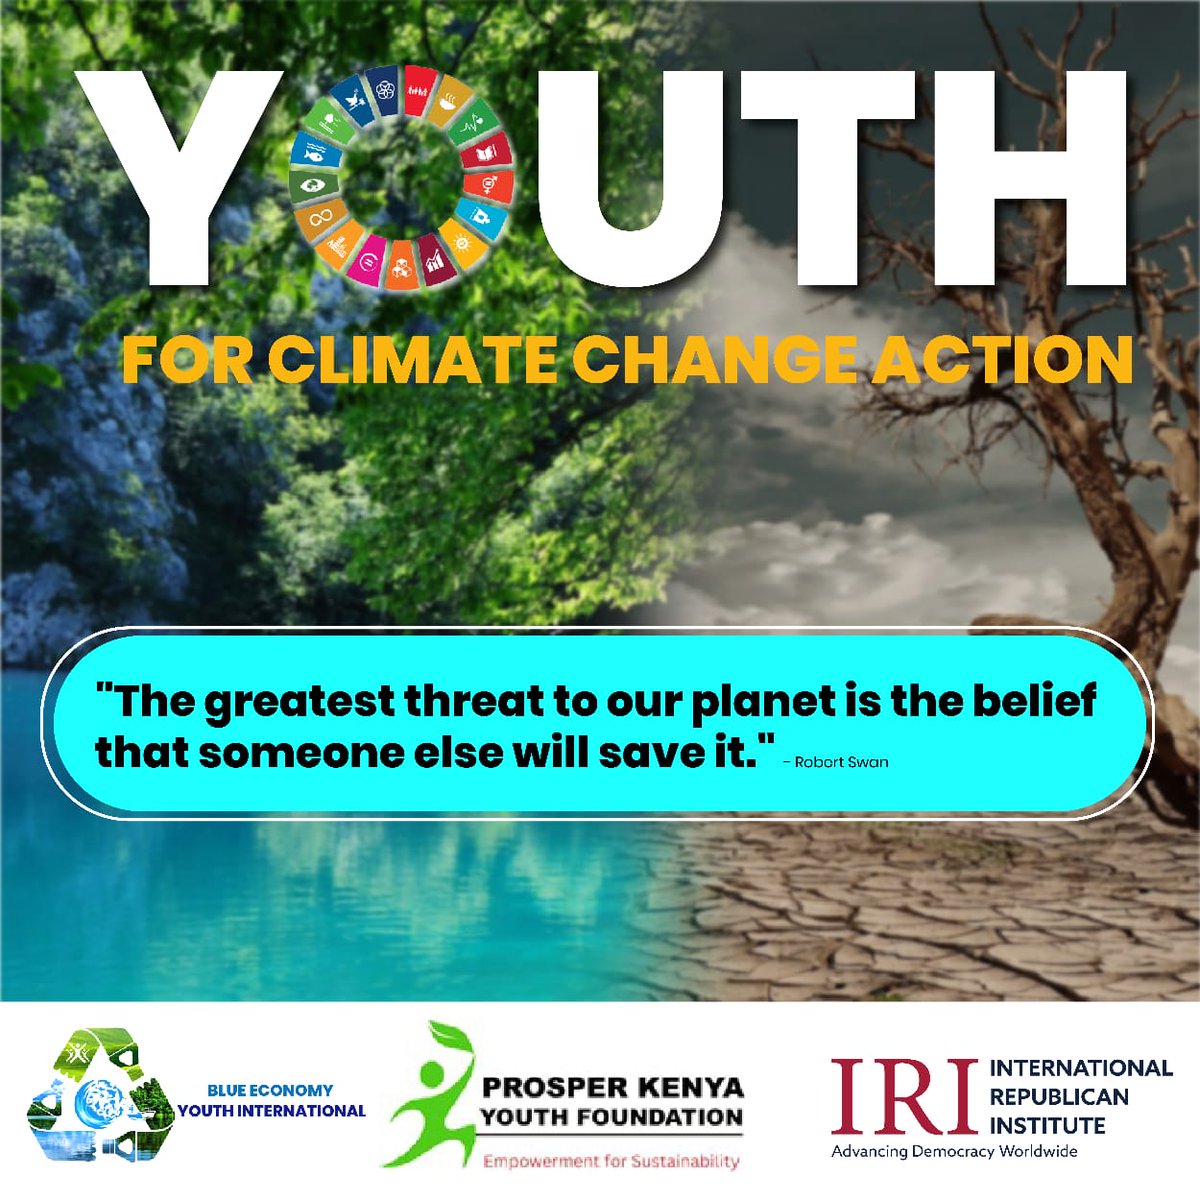 Youth for Climate Change Action' in Machakos County, Kenya. 

Join us in 
 #YouthForClimateAction #ClimateChange #Sustainability #MachakosCounty #Kenya